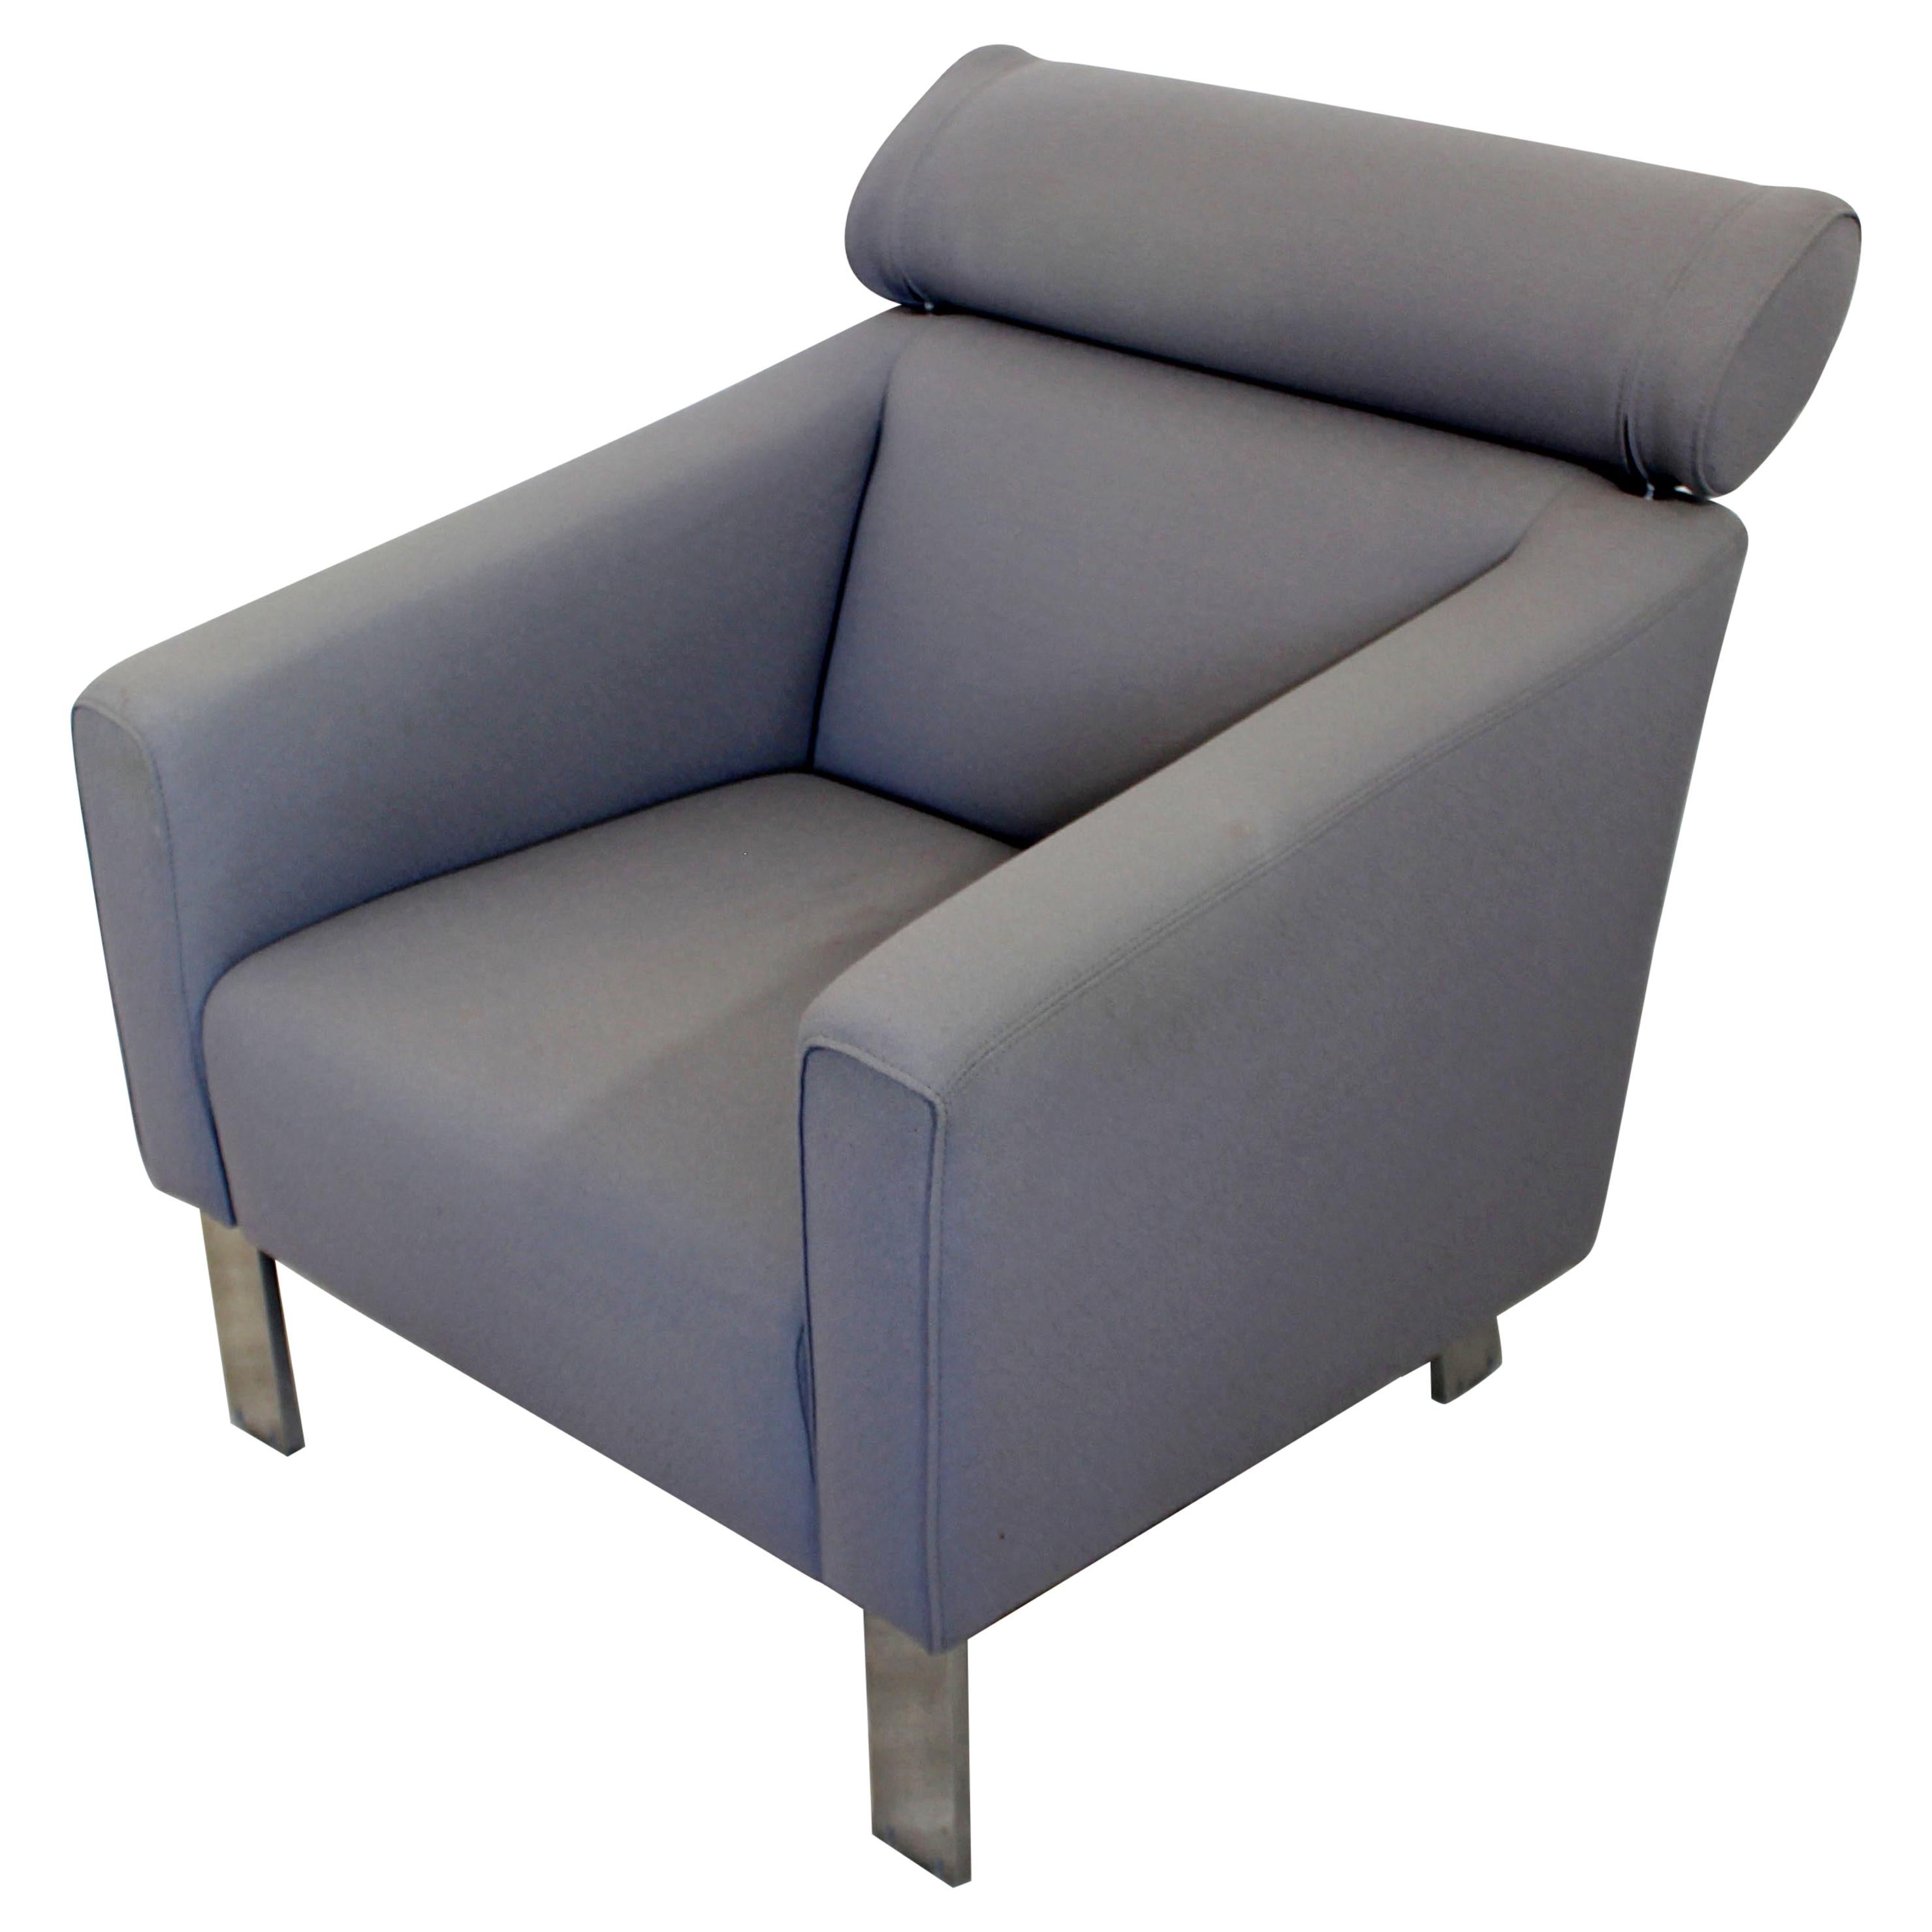 Contemporary Modern Gray Patachou Lounge Armchair by Leolux Sculptural, 1980s